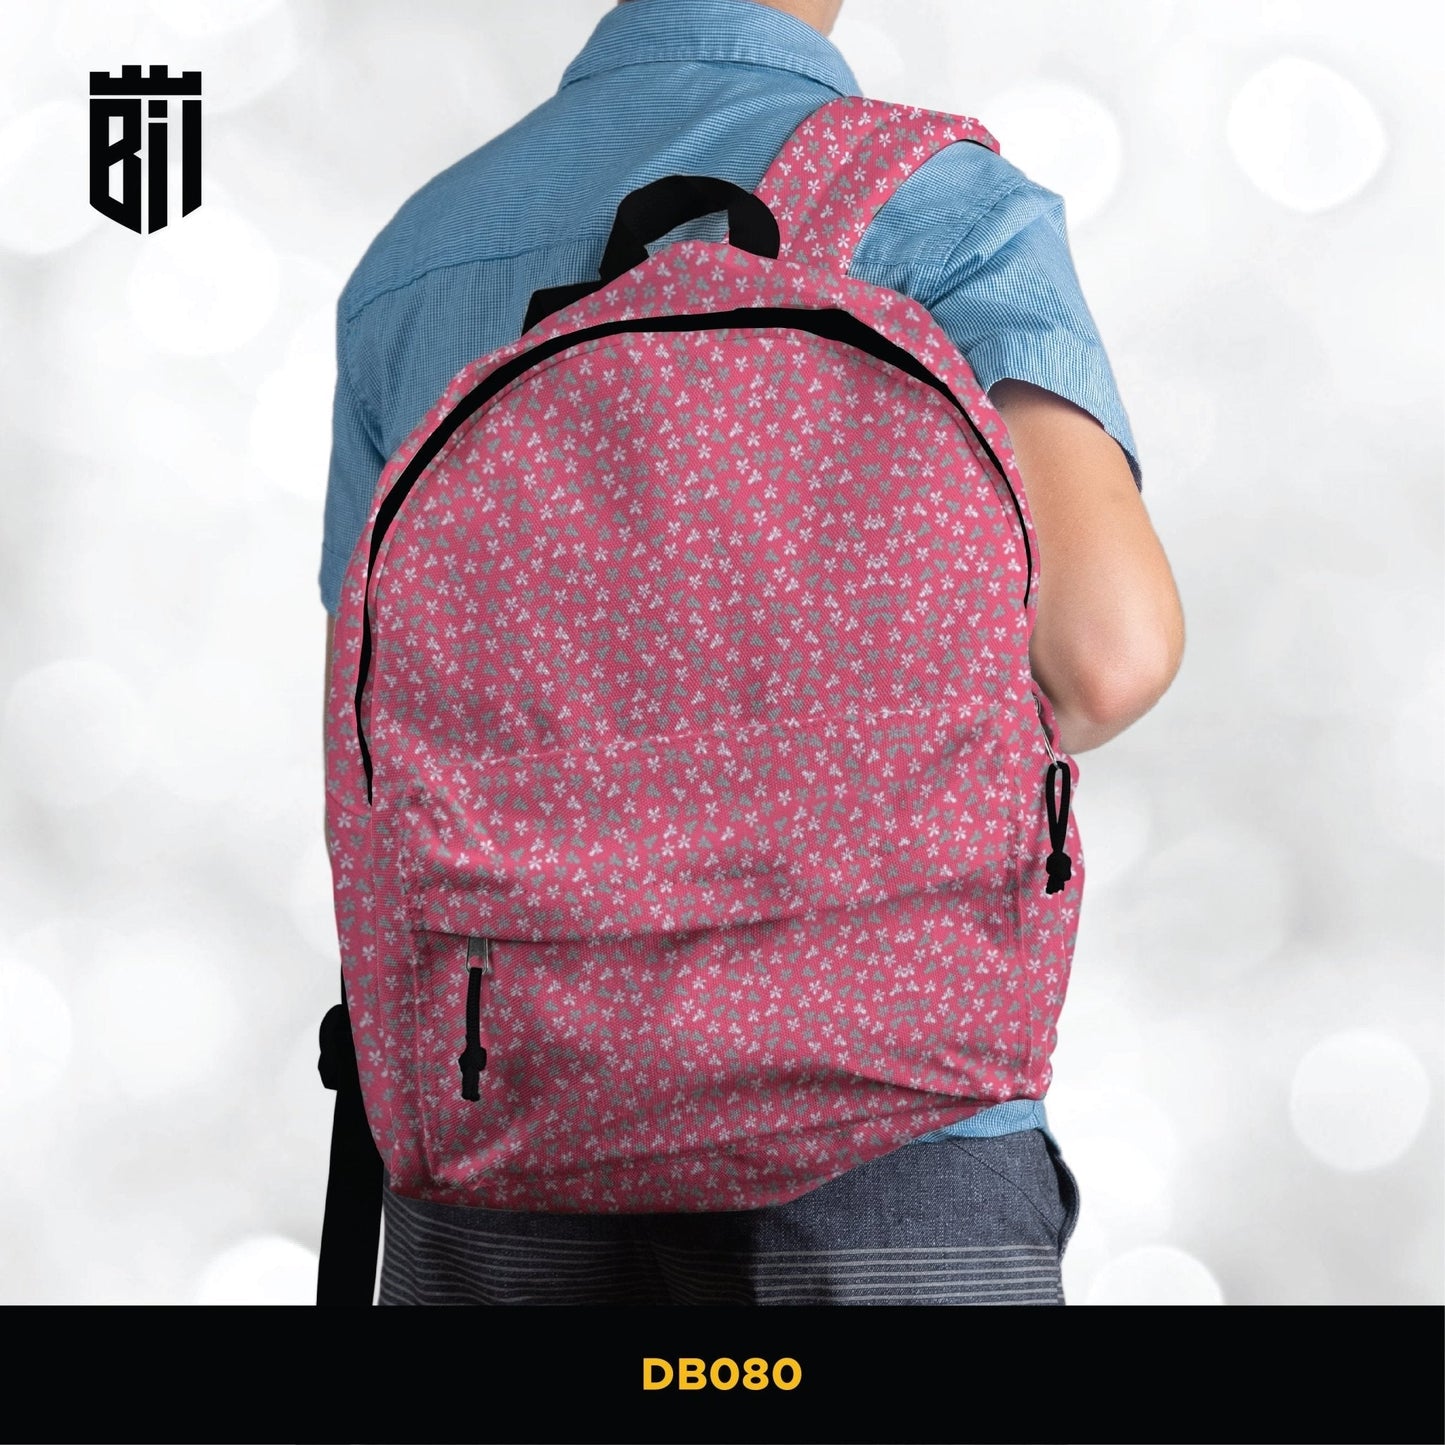 DB080 Pink Floral Allover Printed Backpack - BREACHIT